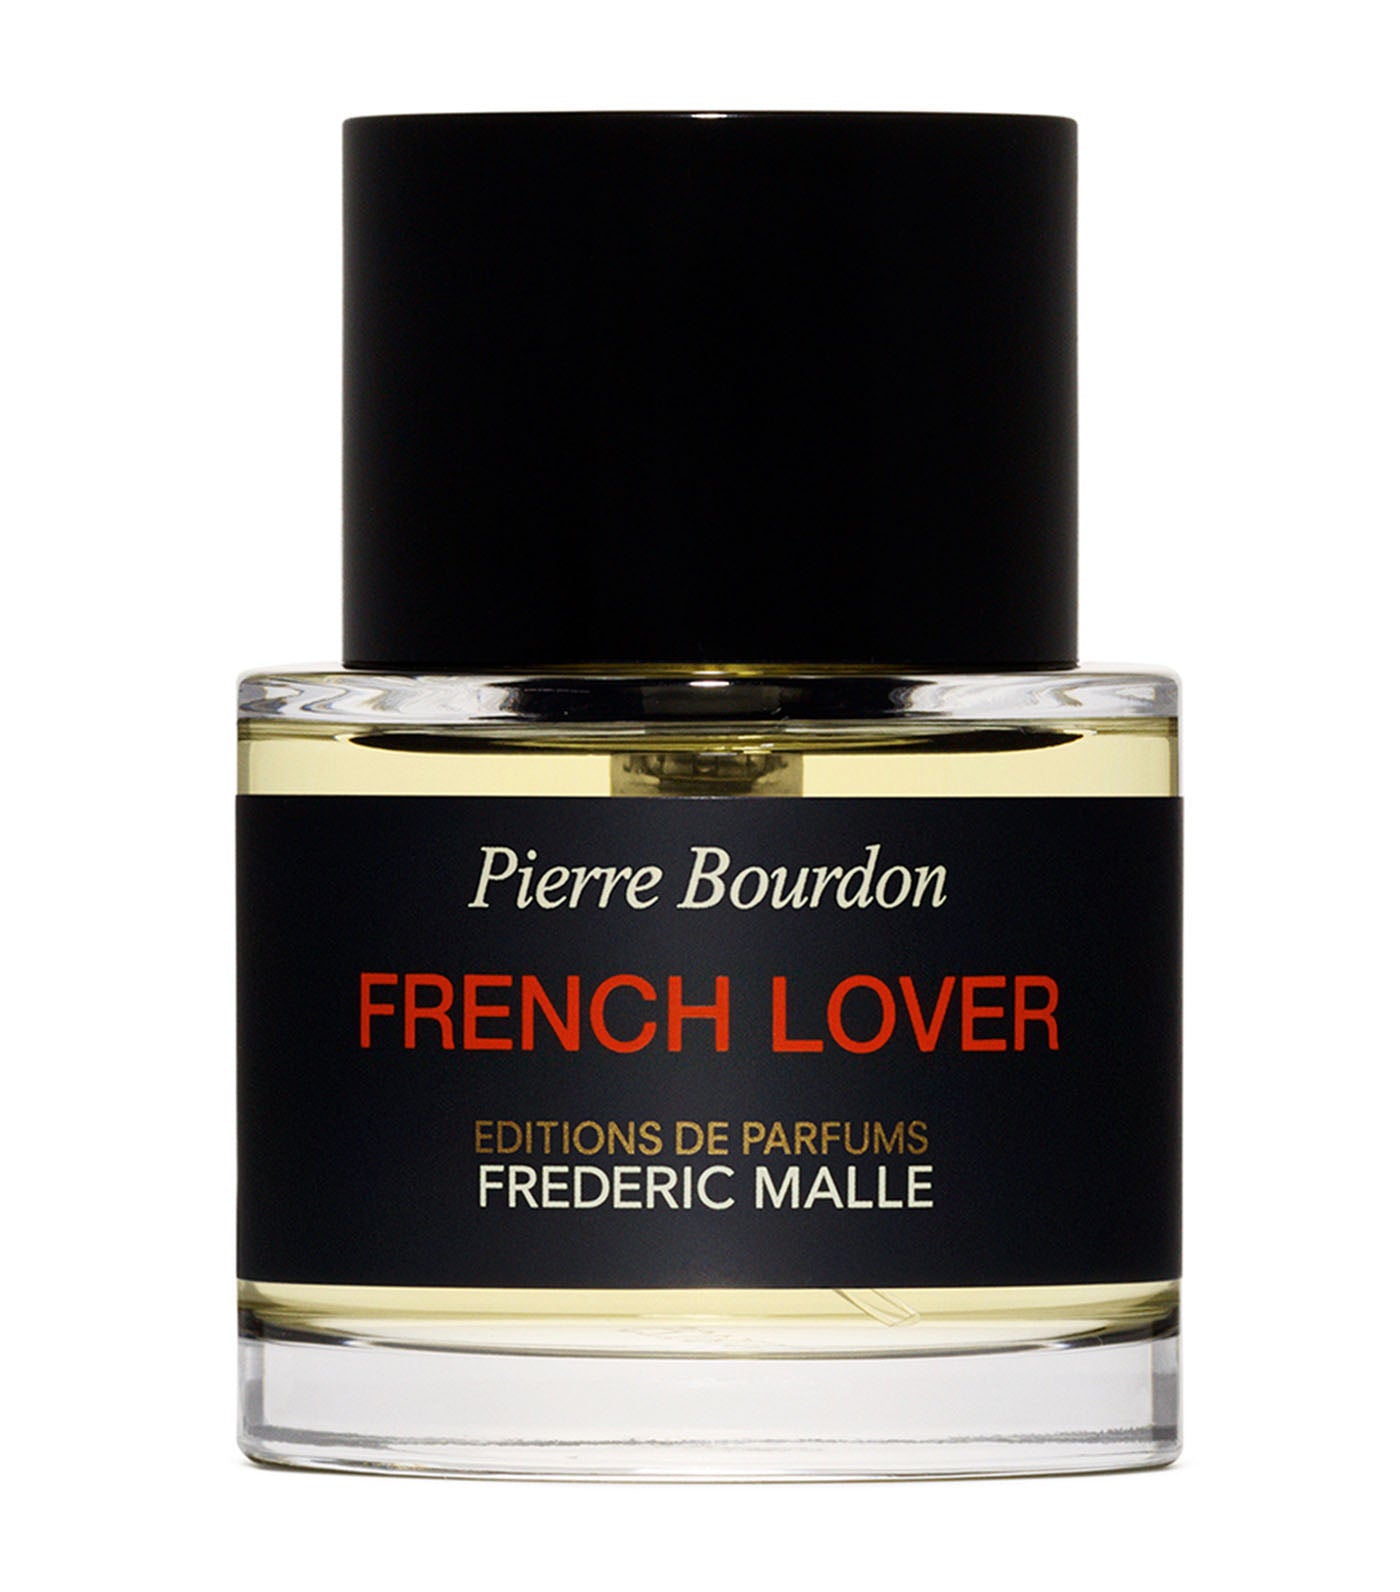 French Lover Perfume by Pierre Bourdon